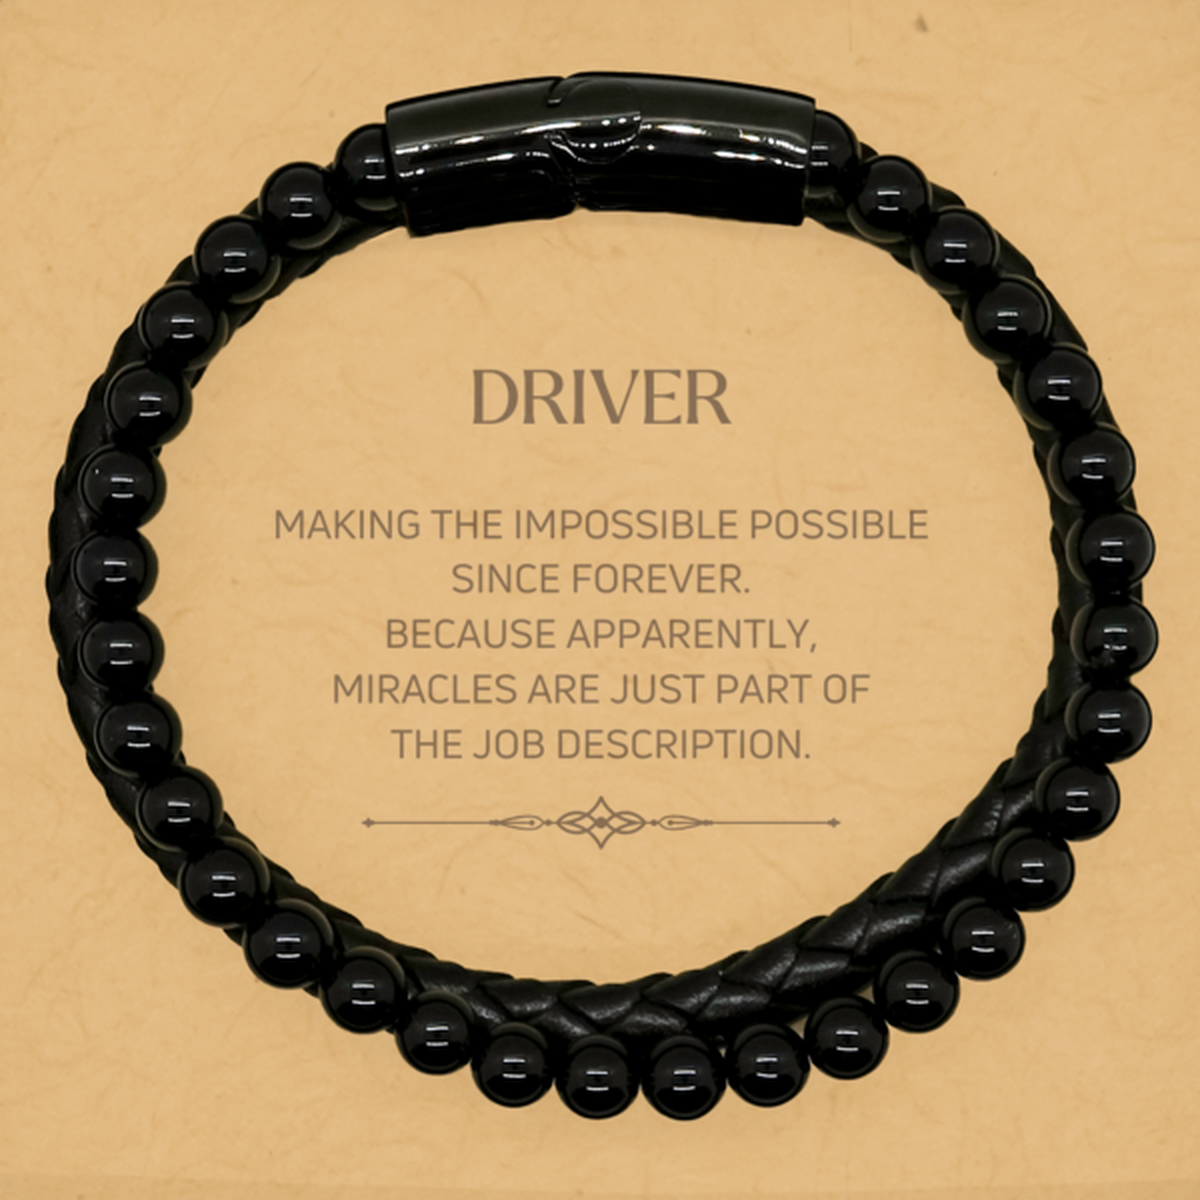 Funny Driver Gifts, Miracles are just part of the job description, Inspirational Birthday Stone Leather Bracelets For Driver, Men, Women, Coworkers, Friends, Boss